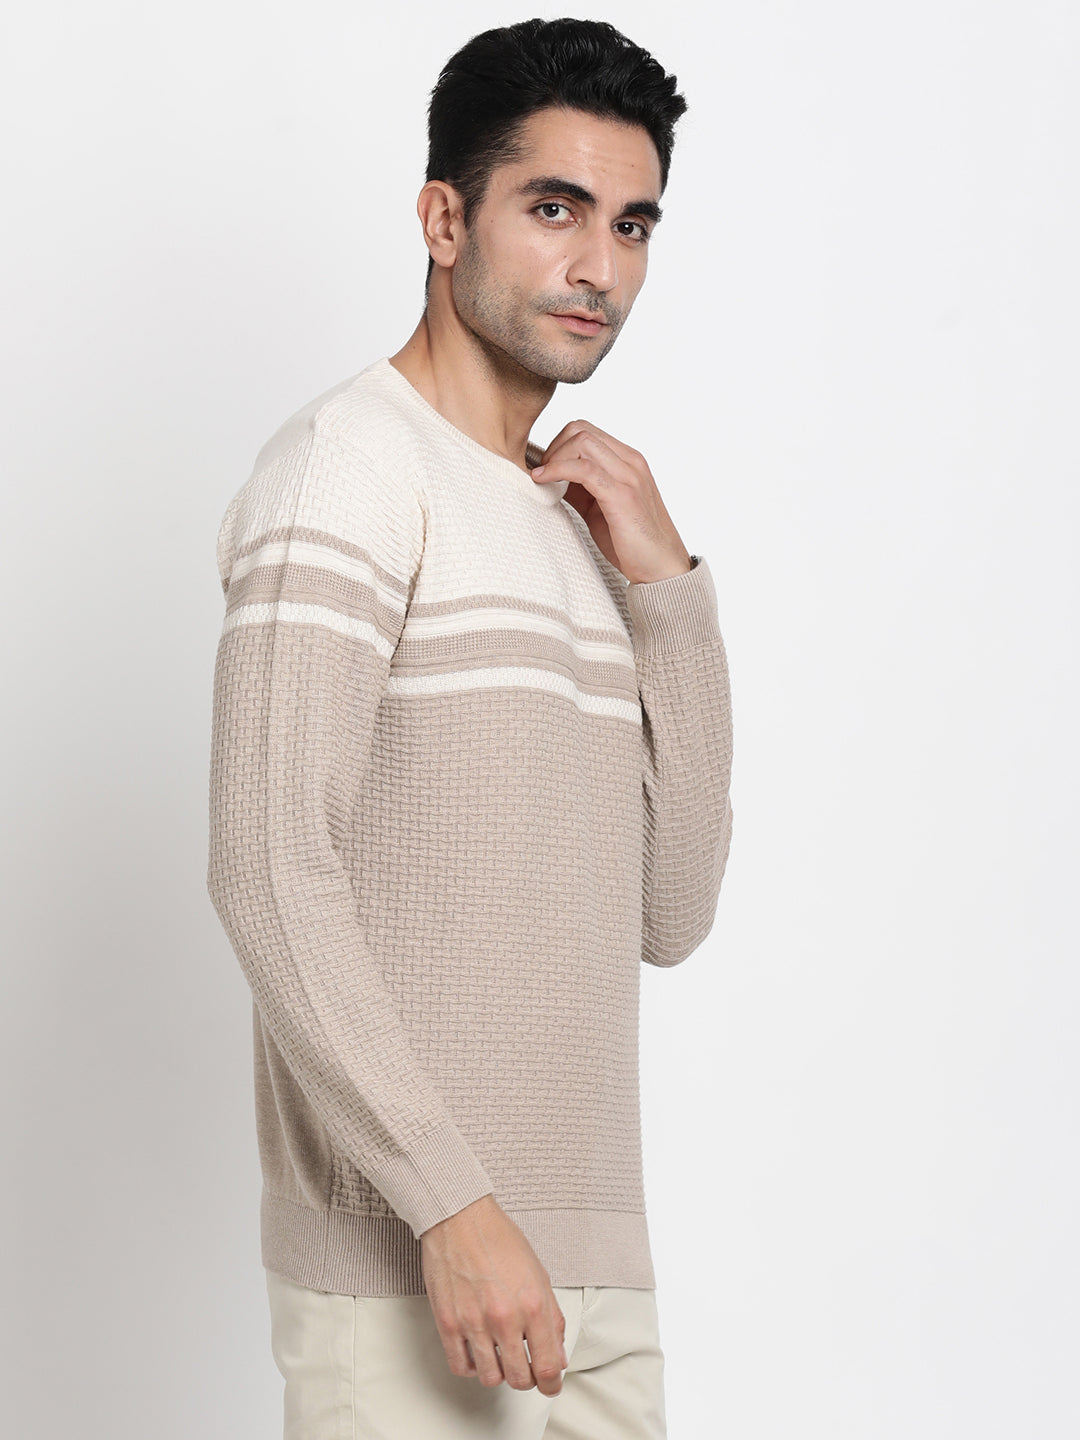 Knitted Beige Striped Regular Fit Full Sleeve Casual Pull Over